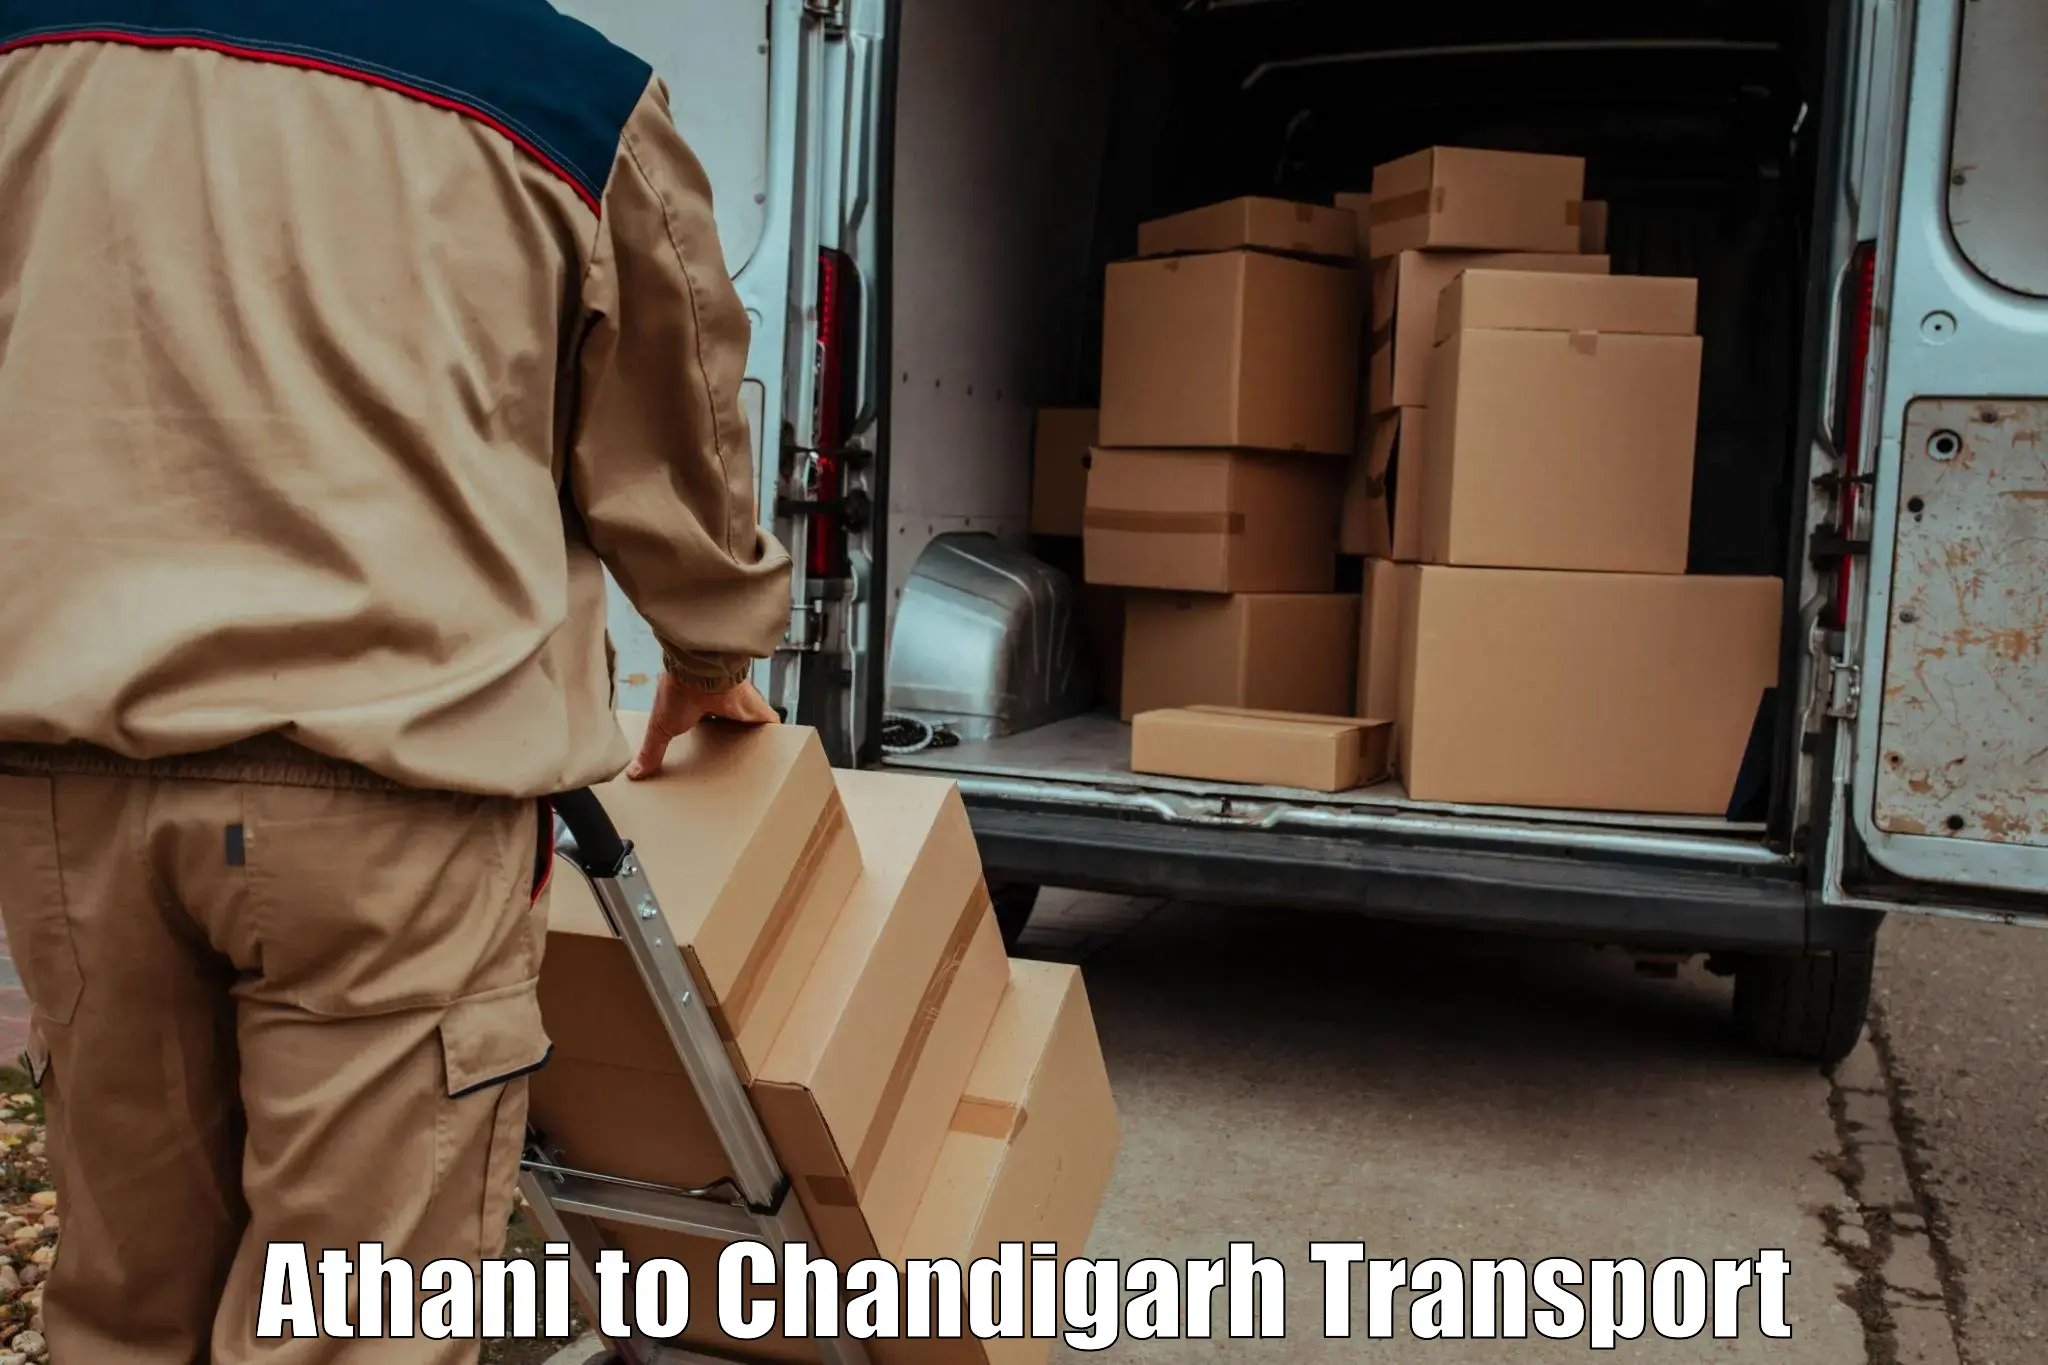 Commercial transport service Athani to Chandigarh